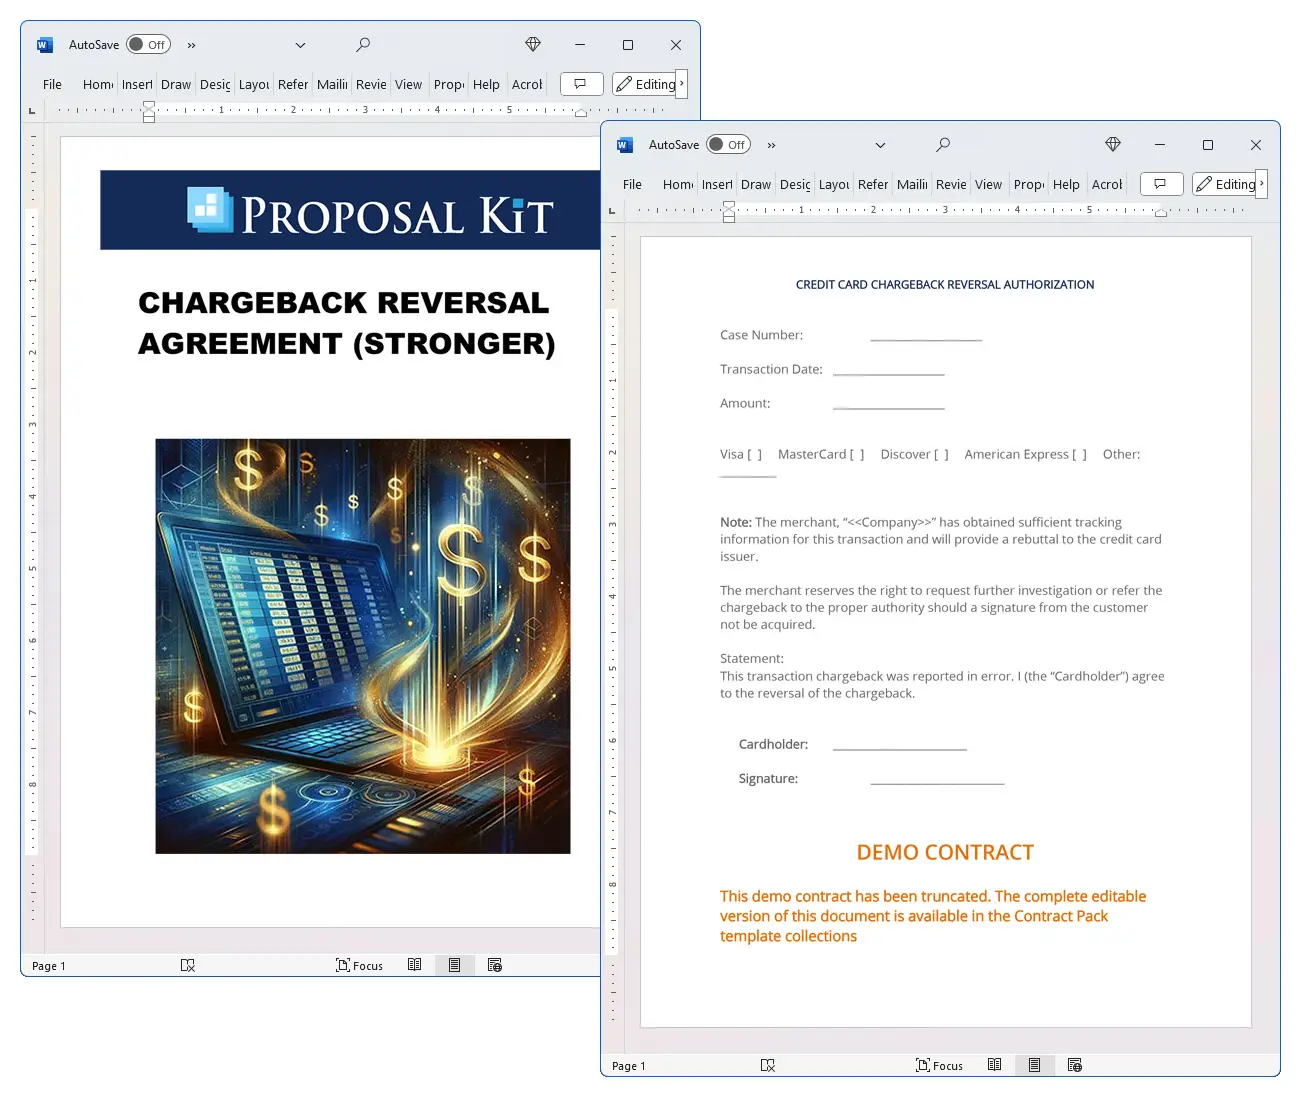 Chargeback Reversal Agreement (Stronger) Concepts